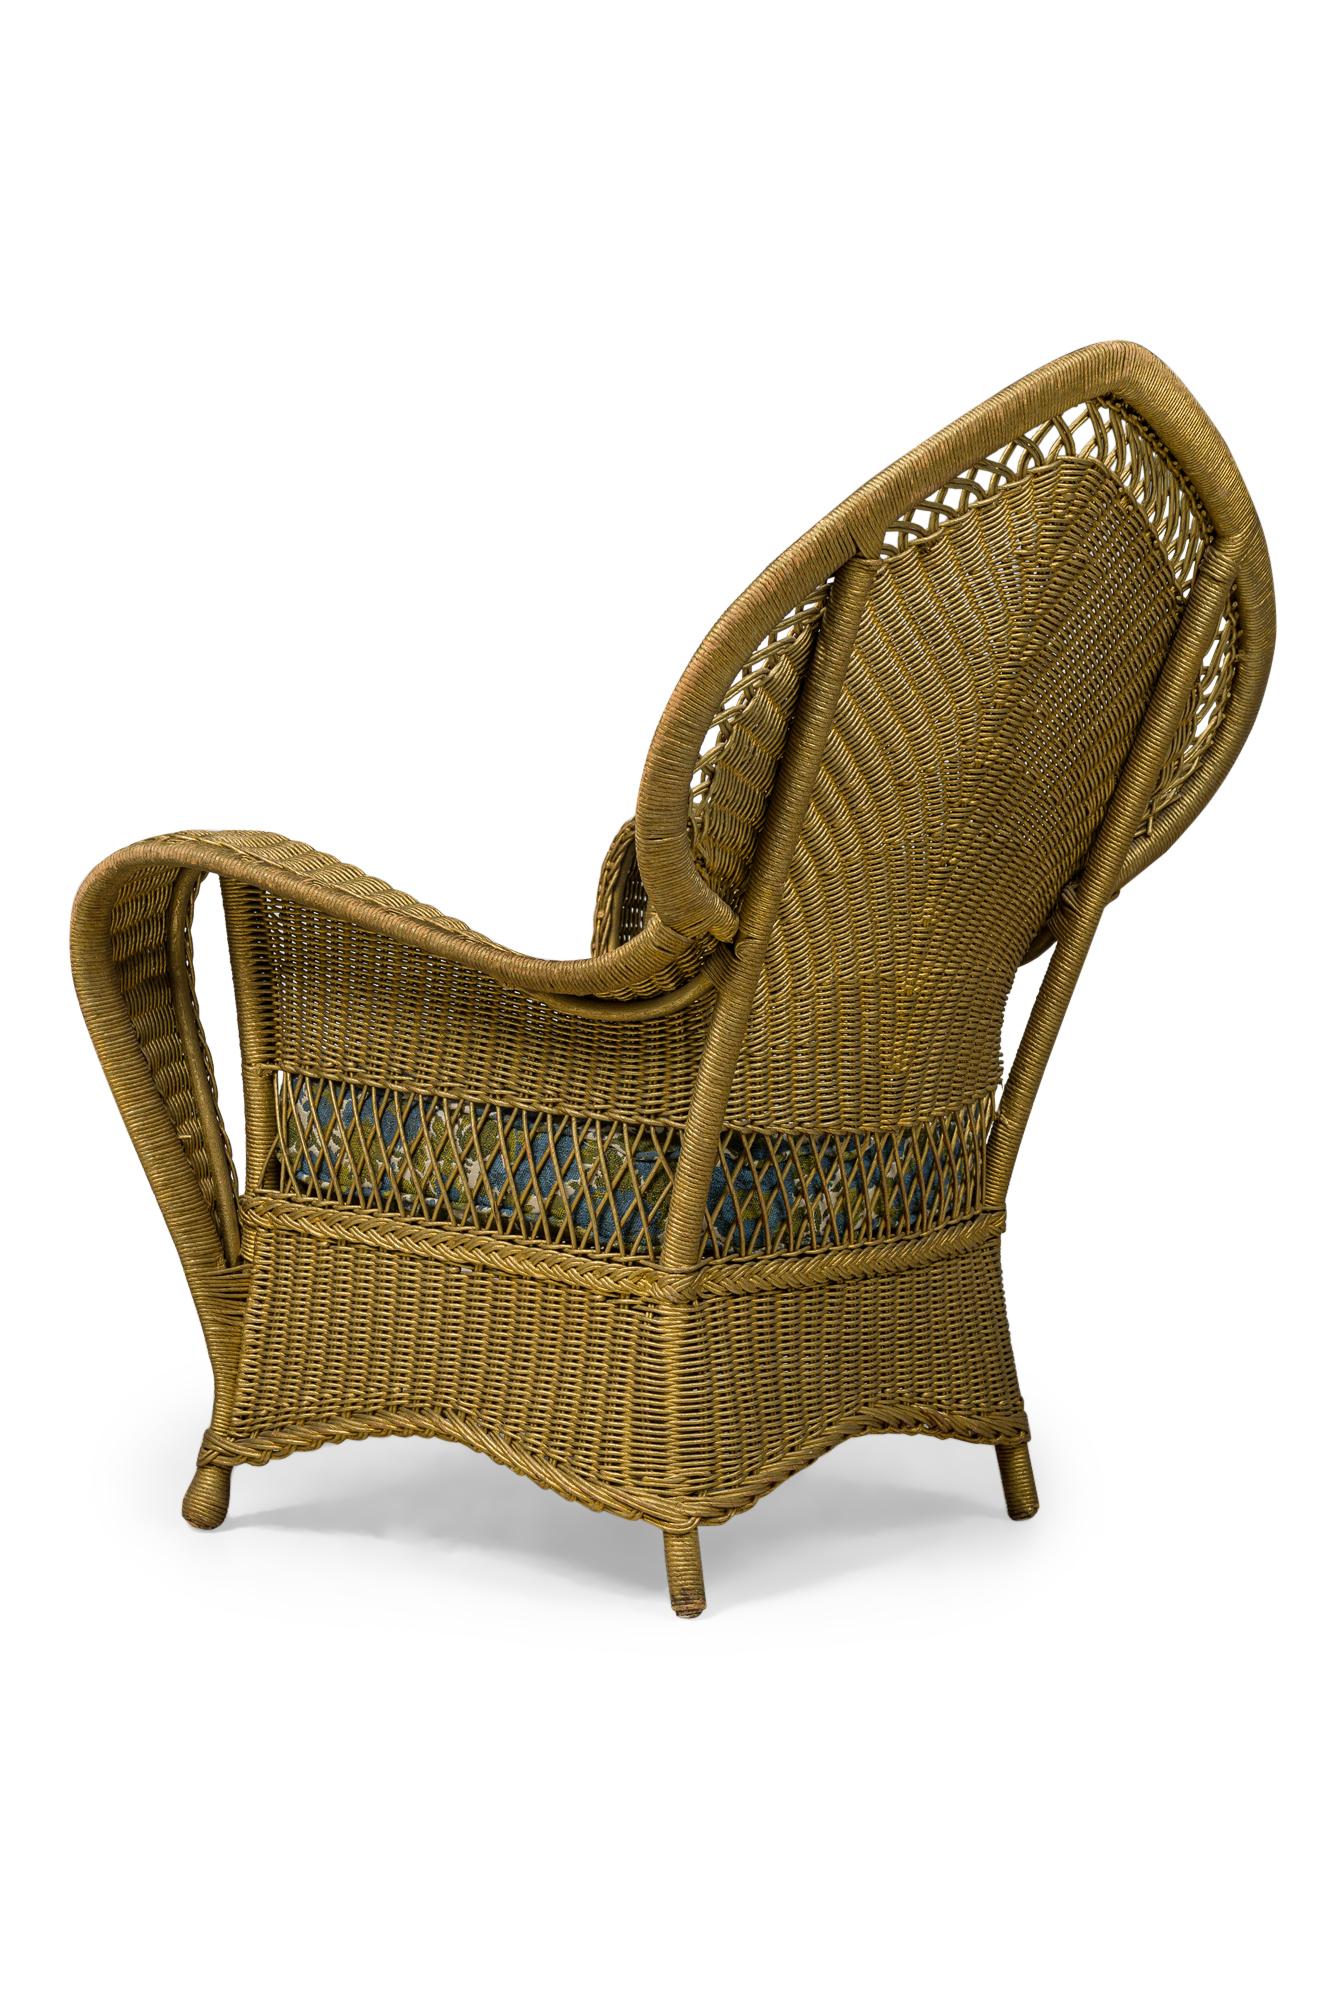 Pair of Similar Art Deco Gold Painted Paper Cord Wicker Armchairs For Sale 7